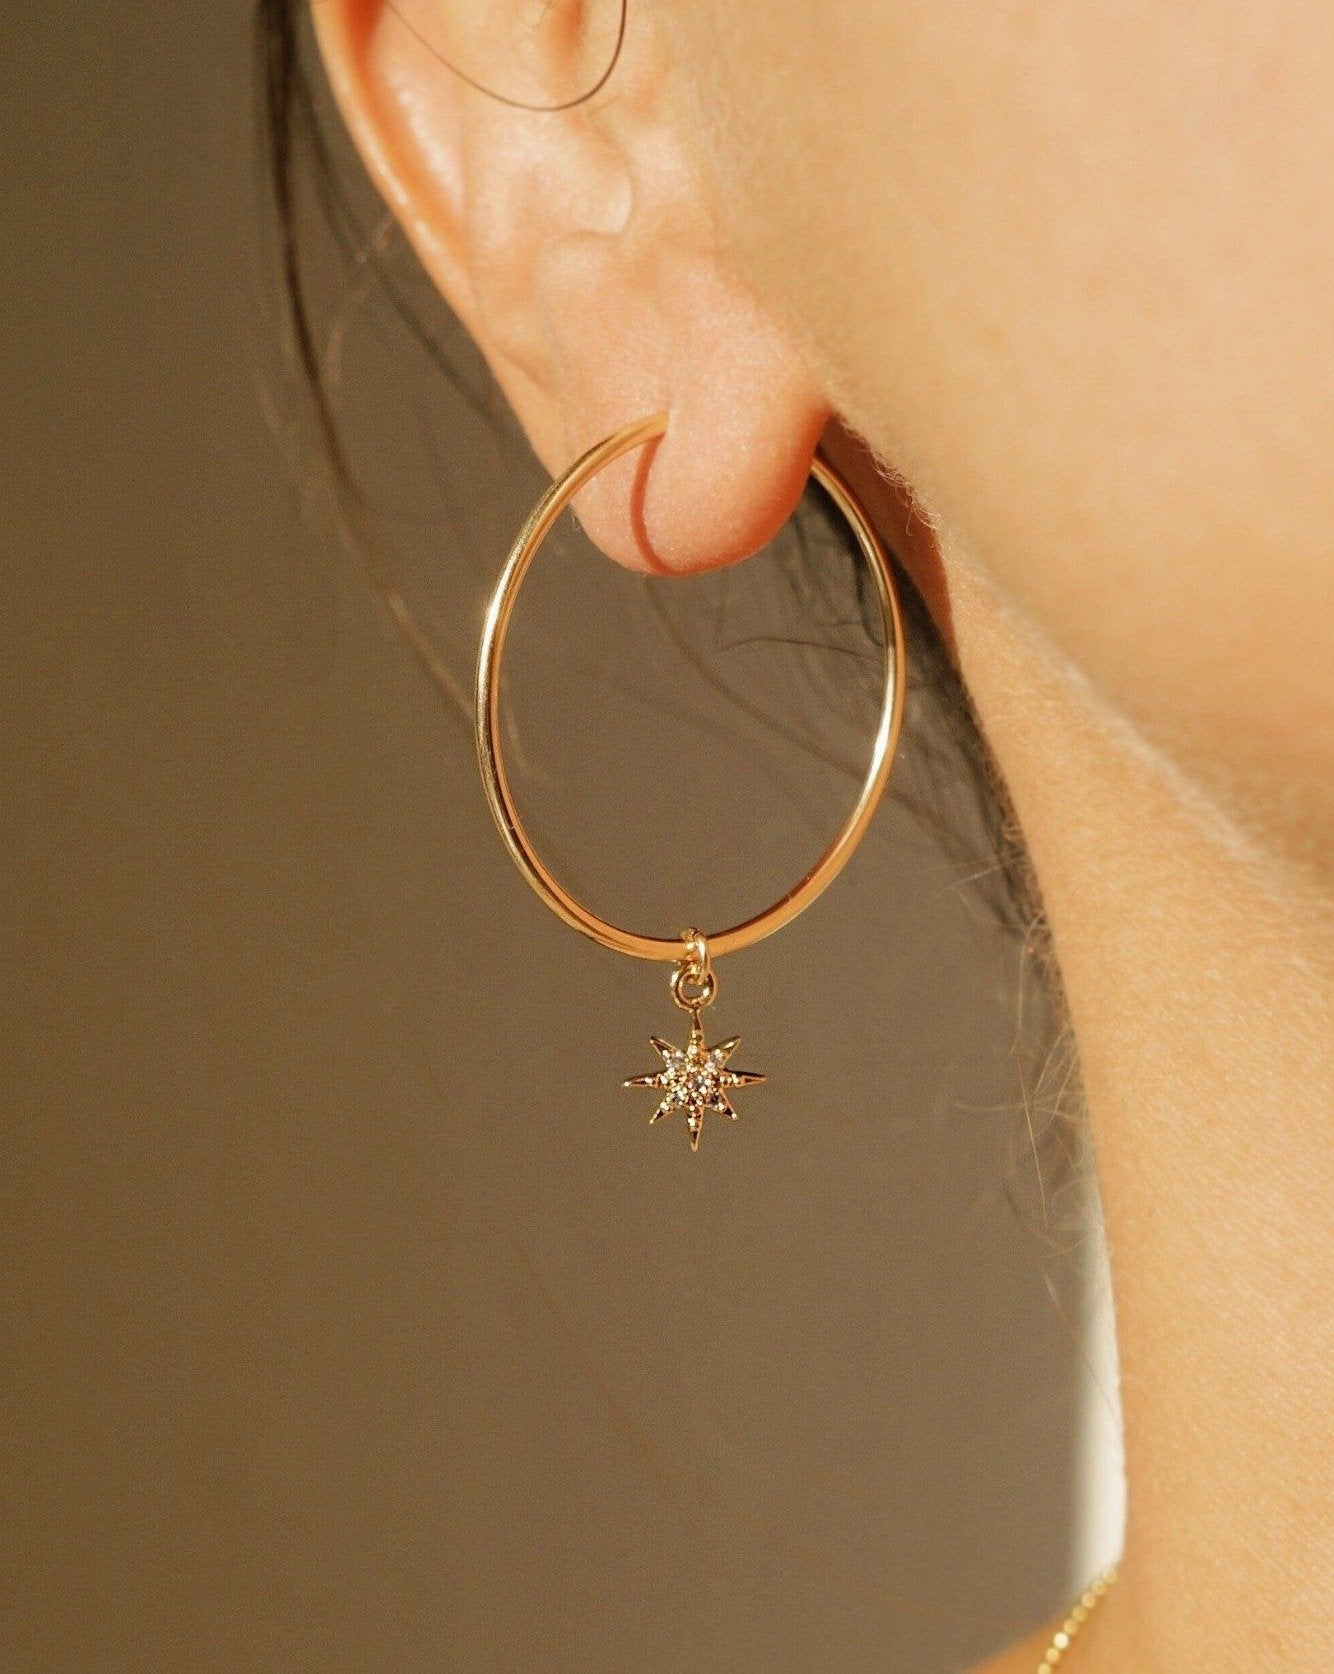 Soleil Hoop Earrings by KOZAKH. 30mm hoop earrings, crafted in 14K Gold Filled, featuring a dangling Cubic Zirconia 6 point star charm.